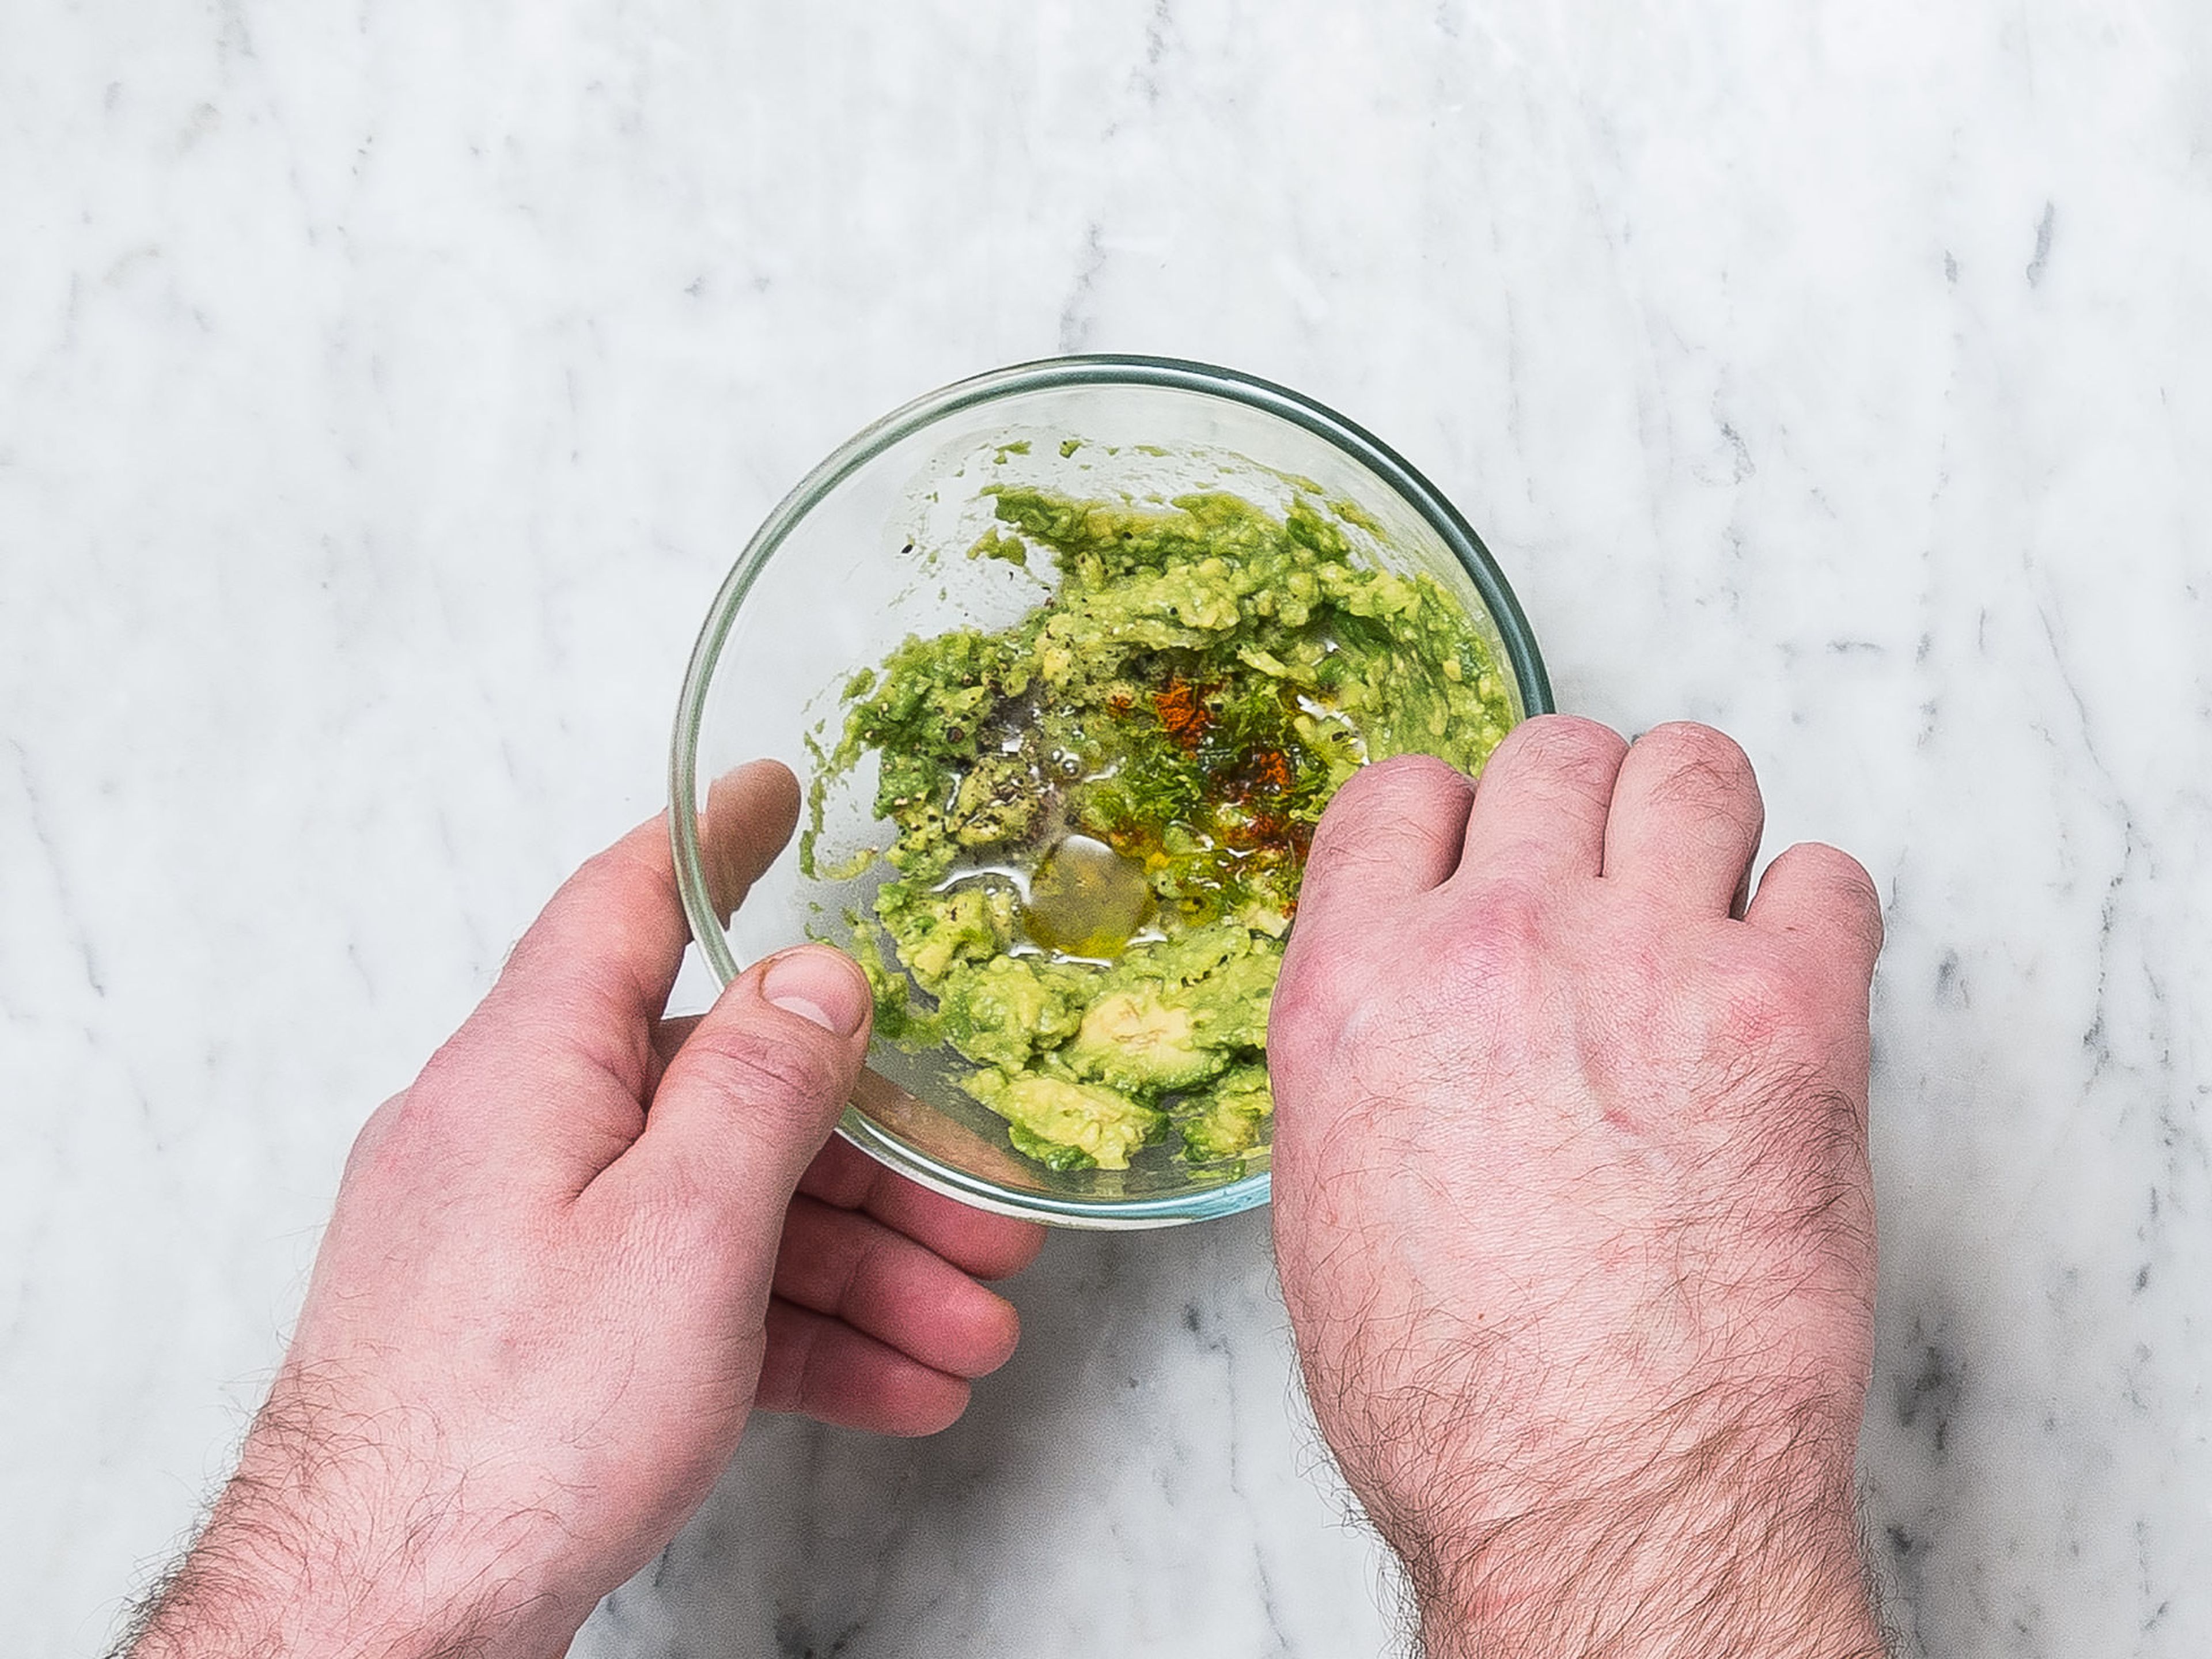 Halve and peel avocado, remove the pit, transfer to a small bowl, and mash with a fork. Season with remaining lime juice and zest, remaining cayenne pepper, salt, and olive oil to taste.